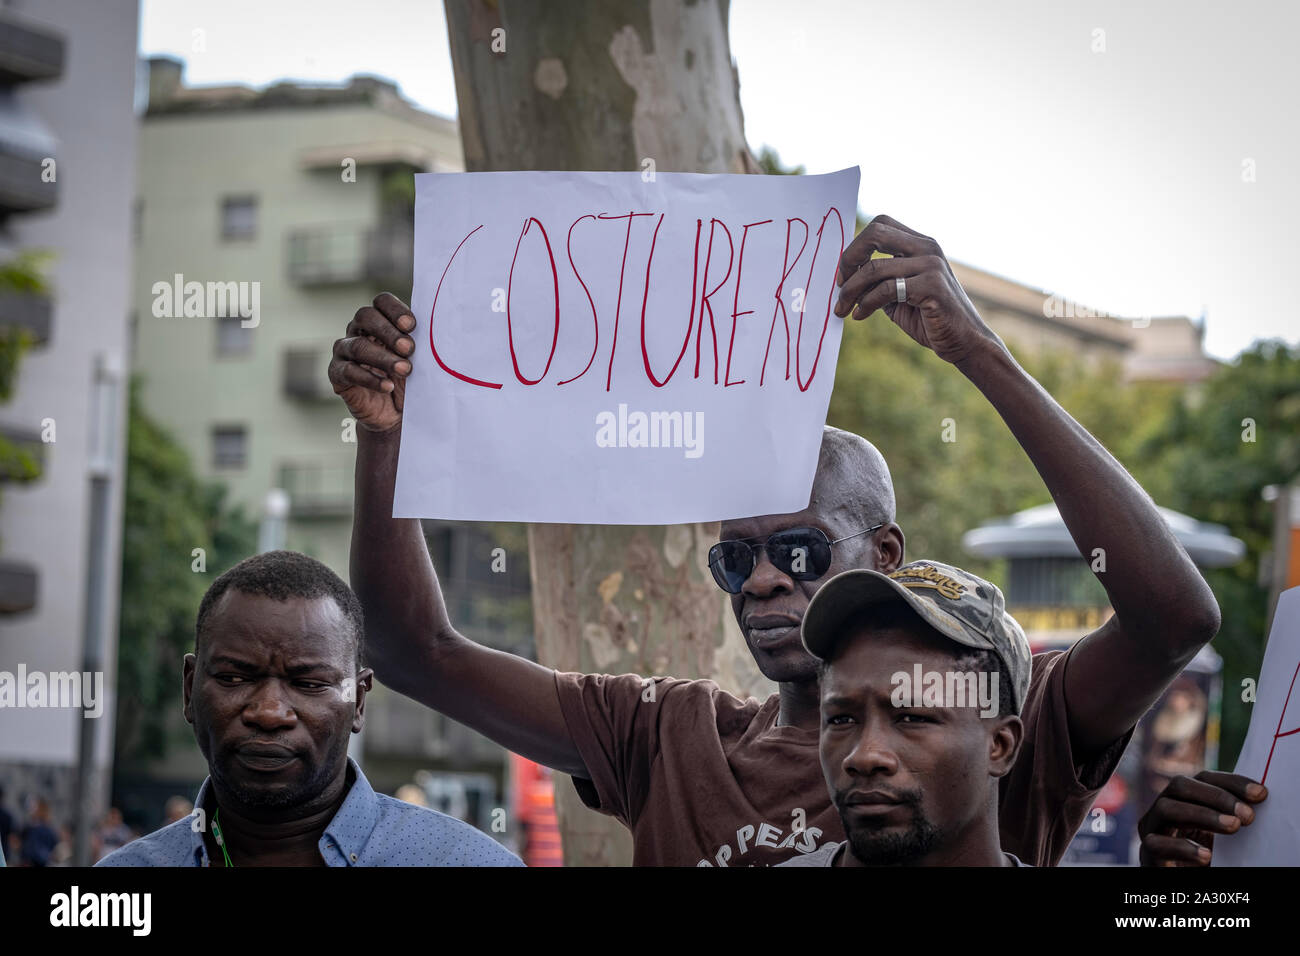 Barcelona, Spain. 04th Oct, 2019. A street vendor holds a placard during the press conference.Street vendors, known as 'manteros' for selling their merchandise in the street on a blanket, have called a press conference to denounce that they have been under police pressure for several months that prevents them from selling and making a living. Credit: SOPA Images Limited/Alamy Live News Stock Photo